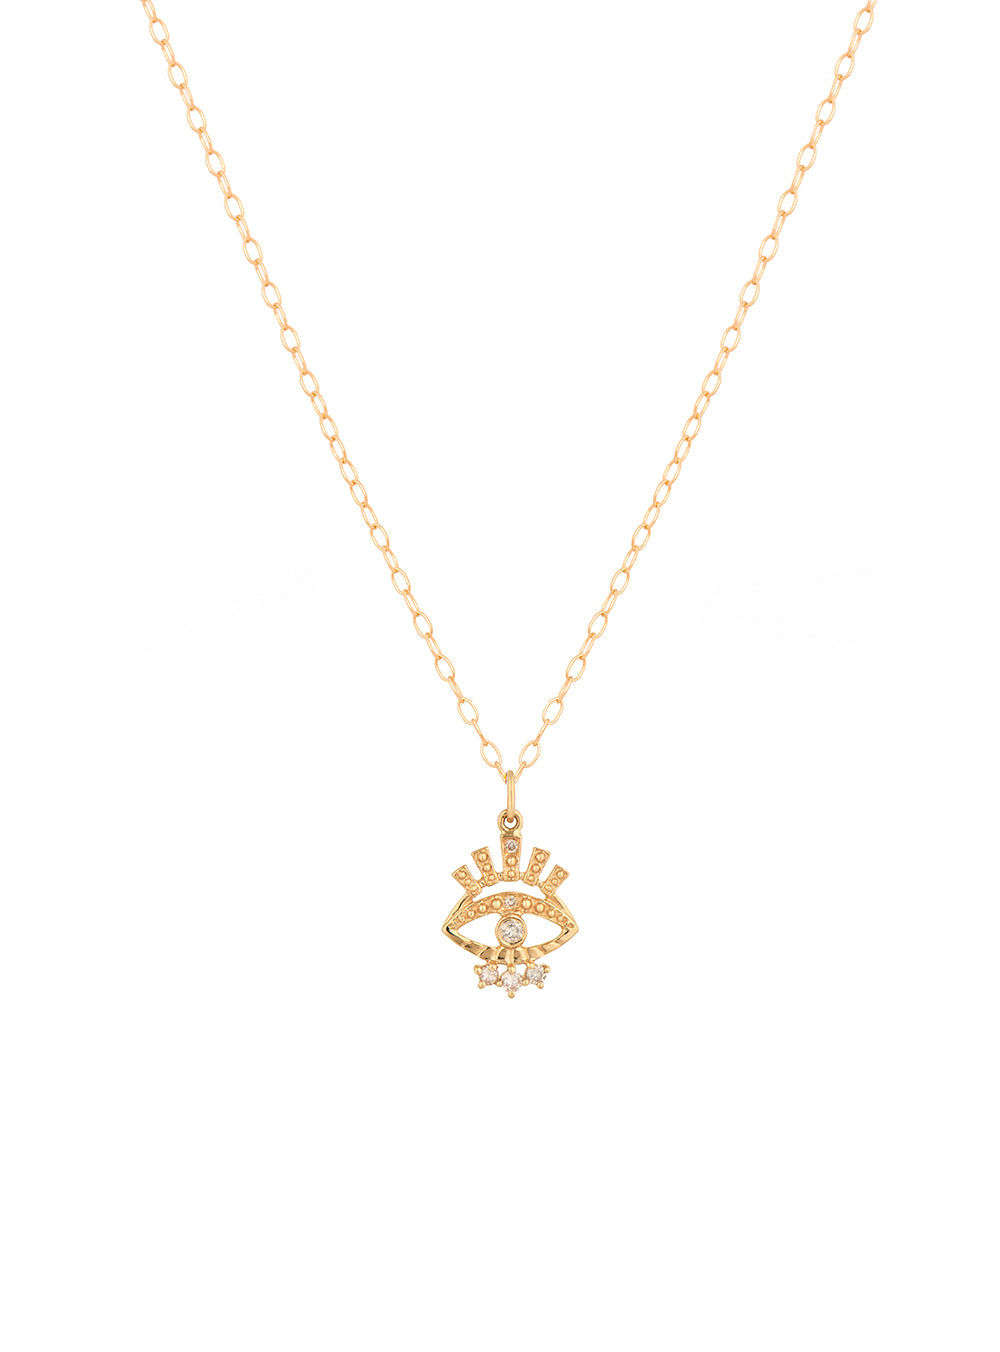 COLLIER PROTECTION OEIL 14K